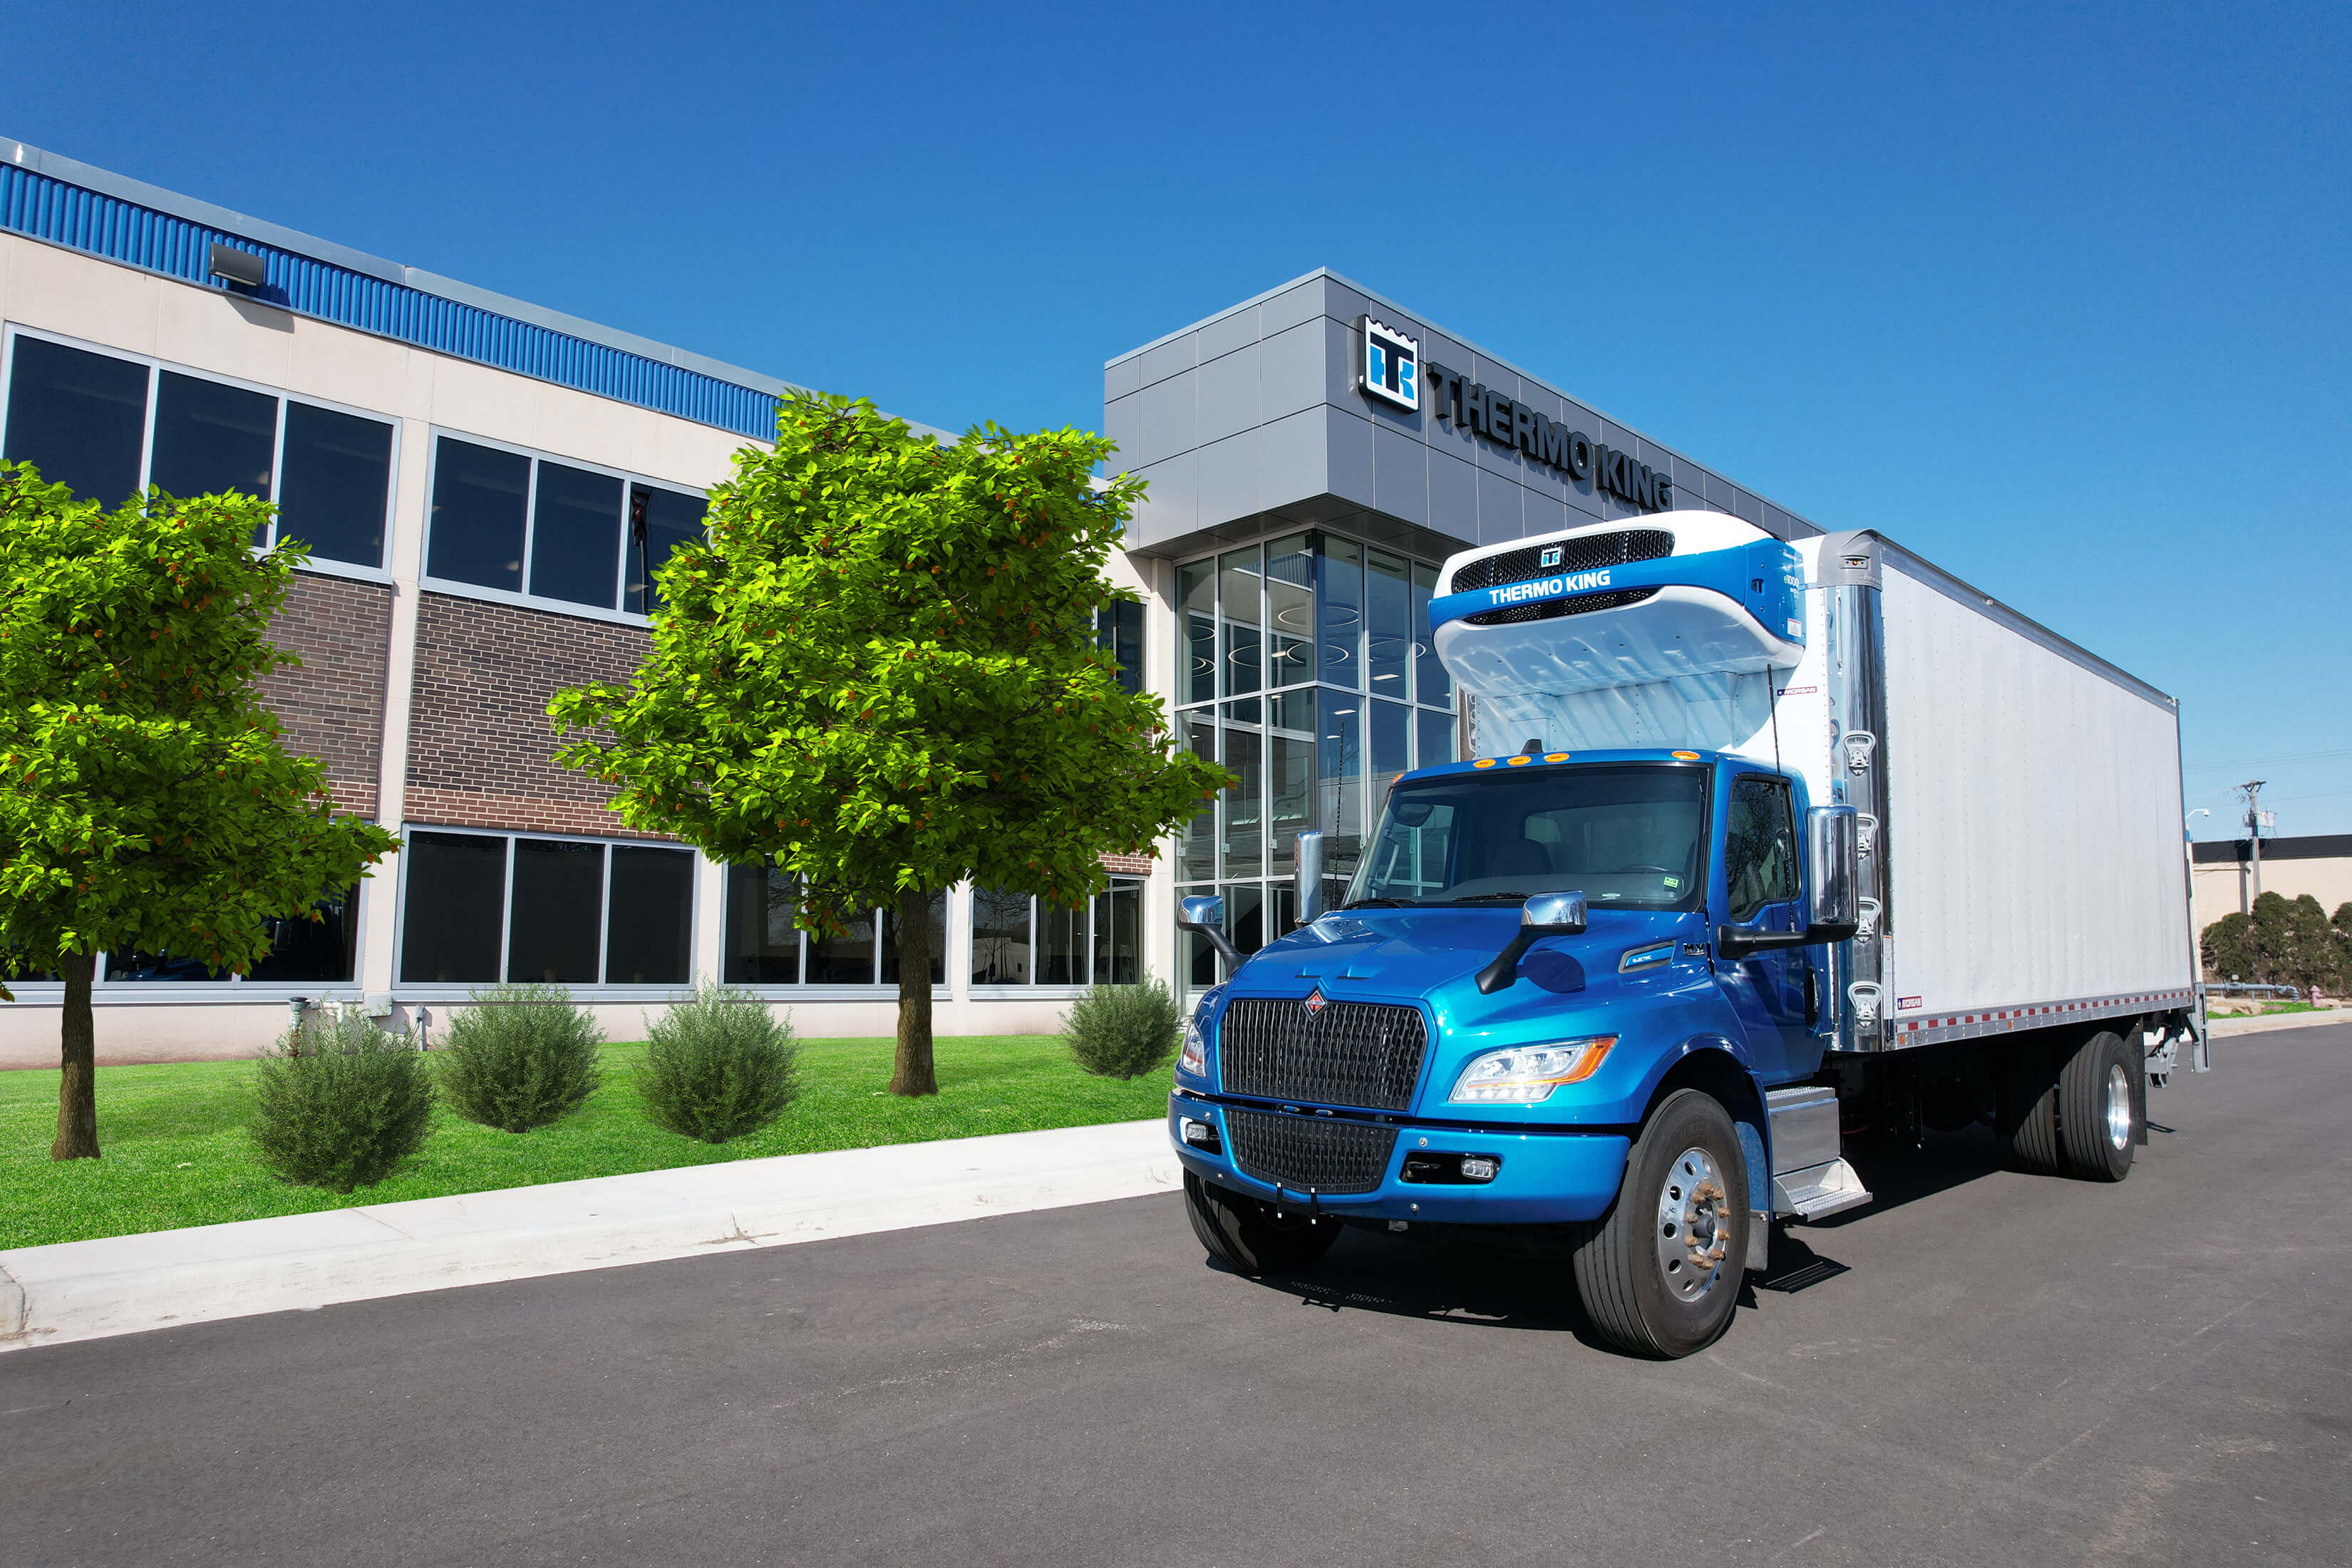 Thermo King e1000 application photo blue truck